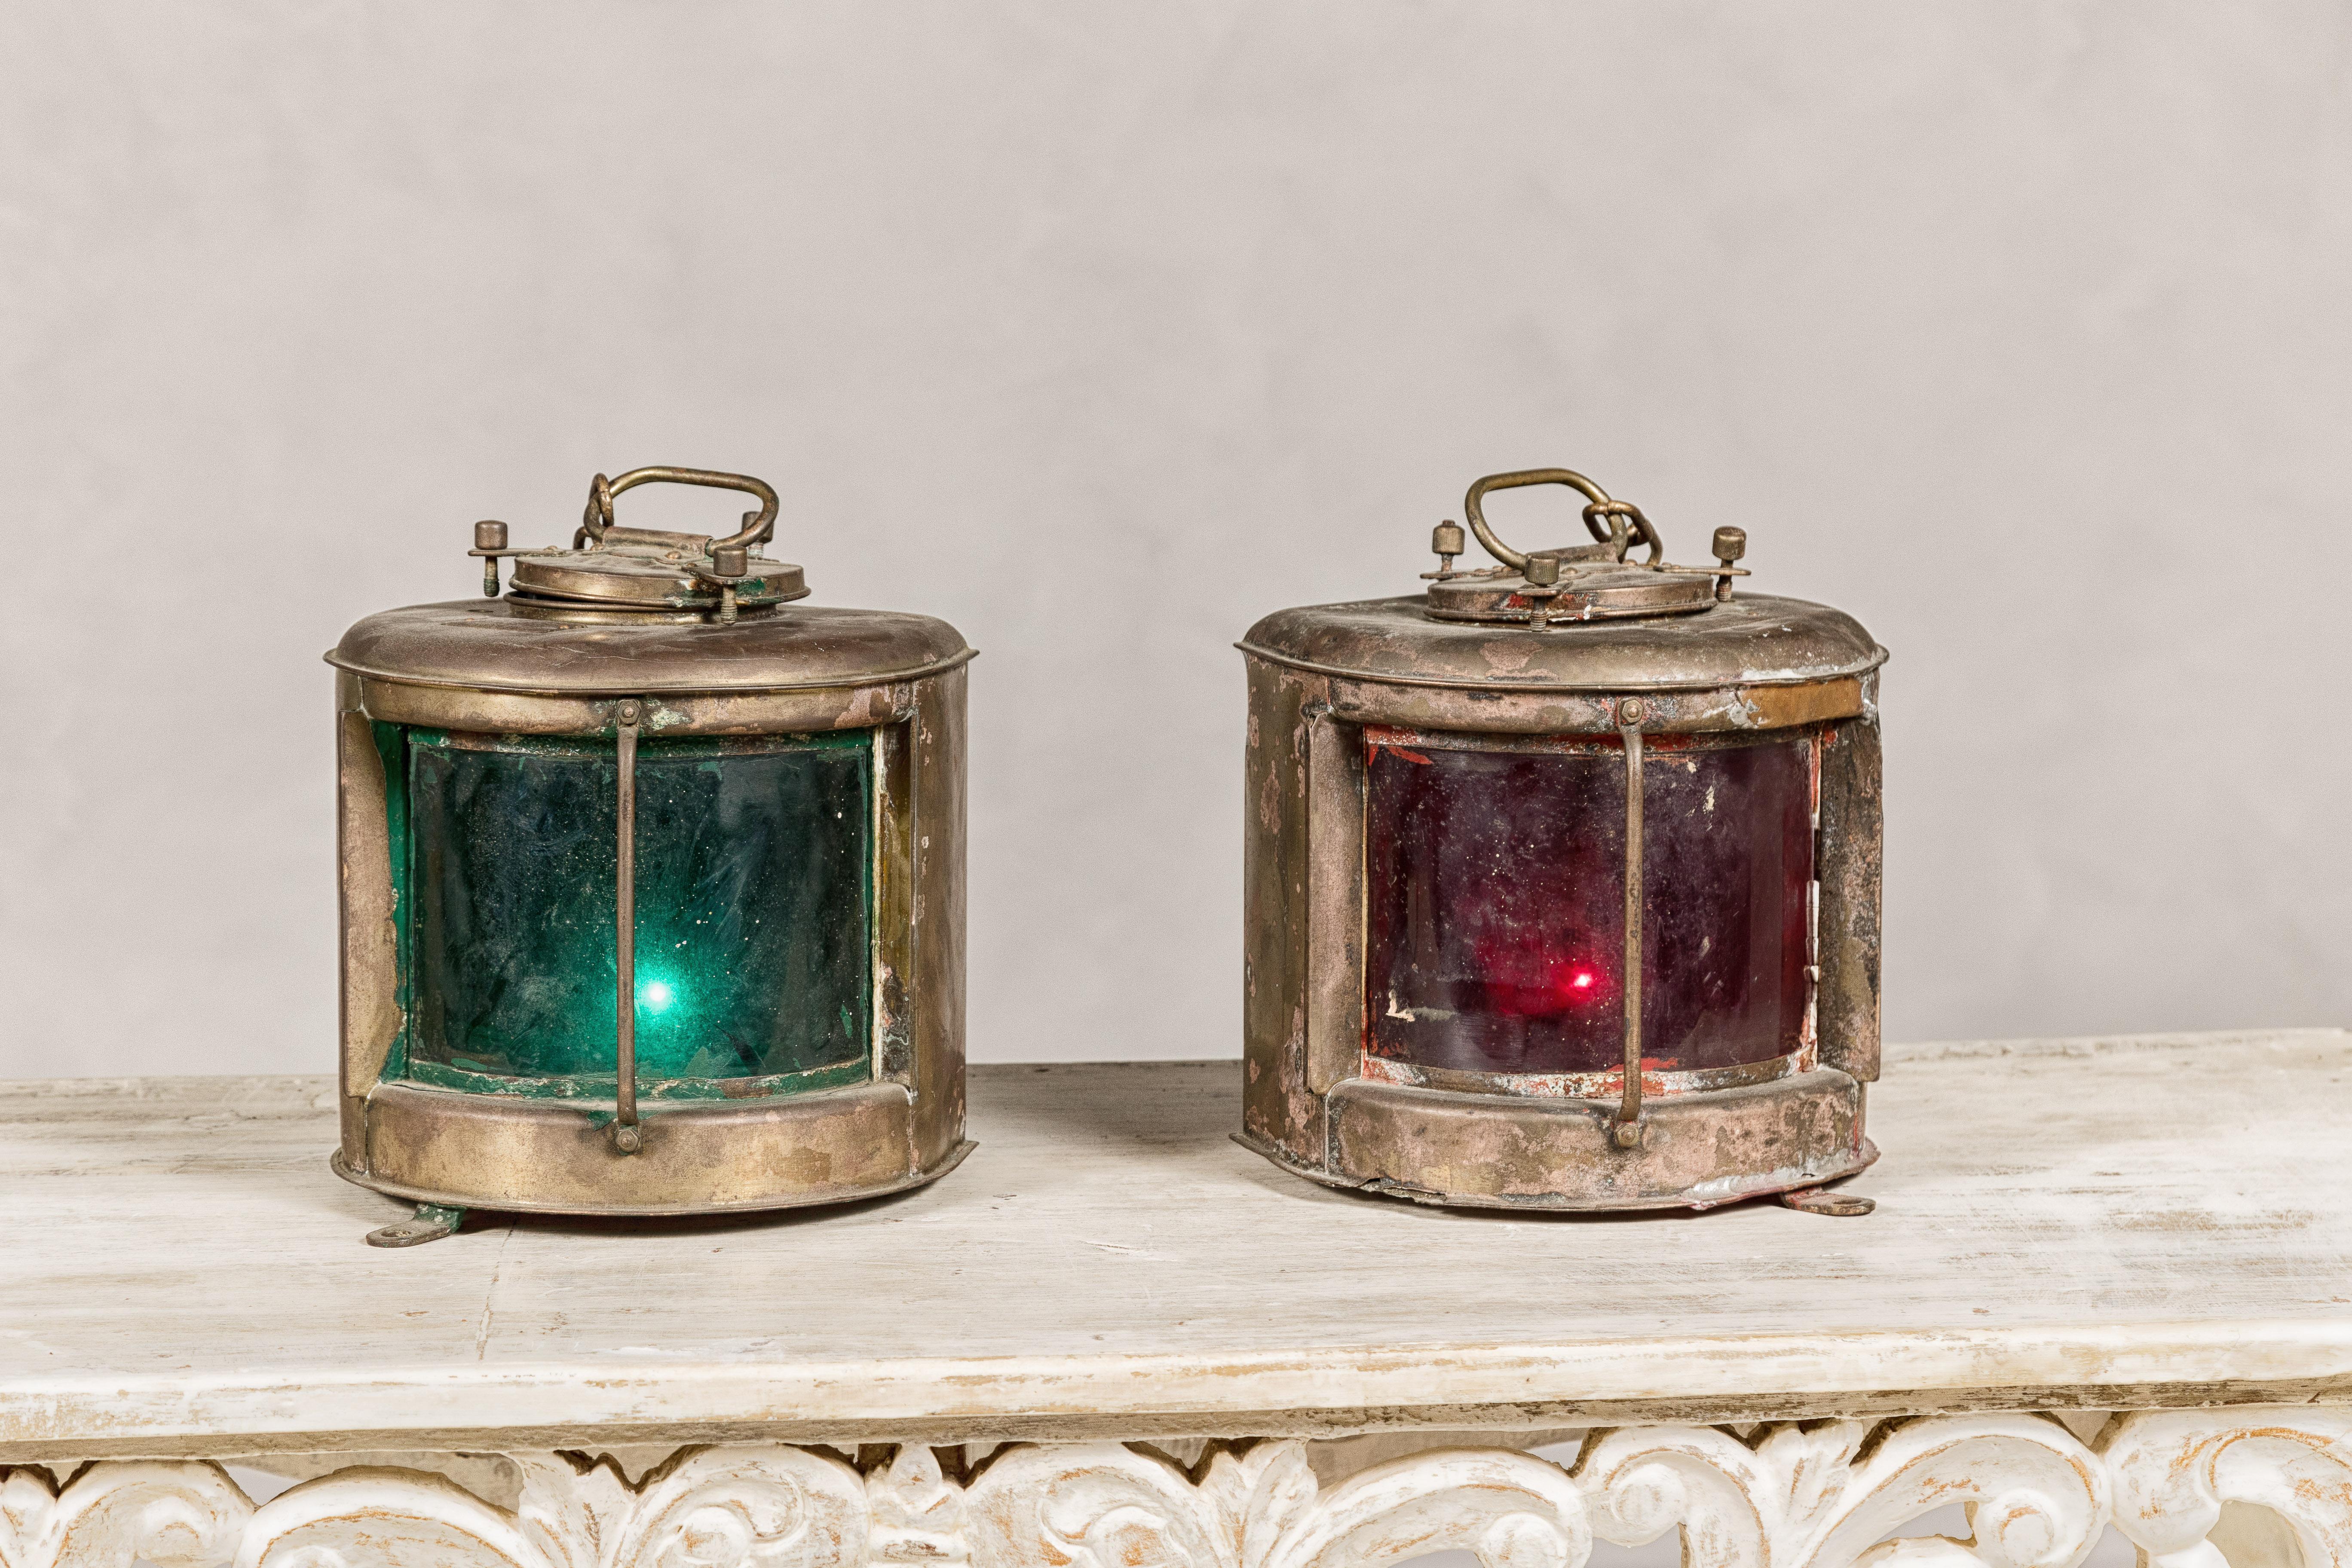 A pair of Japanese Nippon Sento ship lanterns circa 1966 with green and red glass. These authentic Japanese Nippon Sento ship lanterns, dating back to 1966, are a maritime enthusiast's treasure. Constructed with robust metal casings, they house